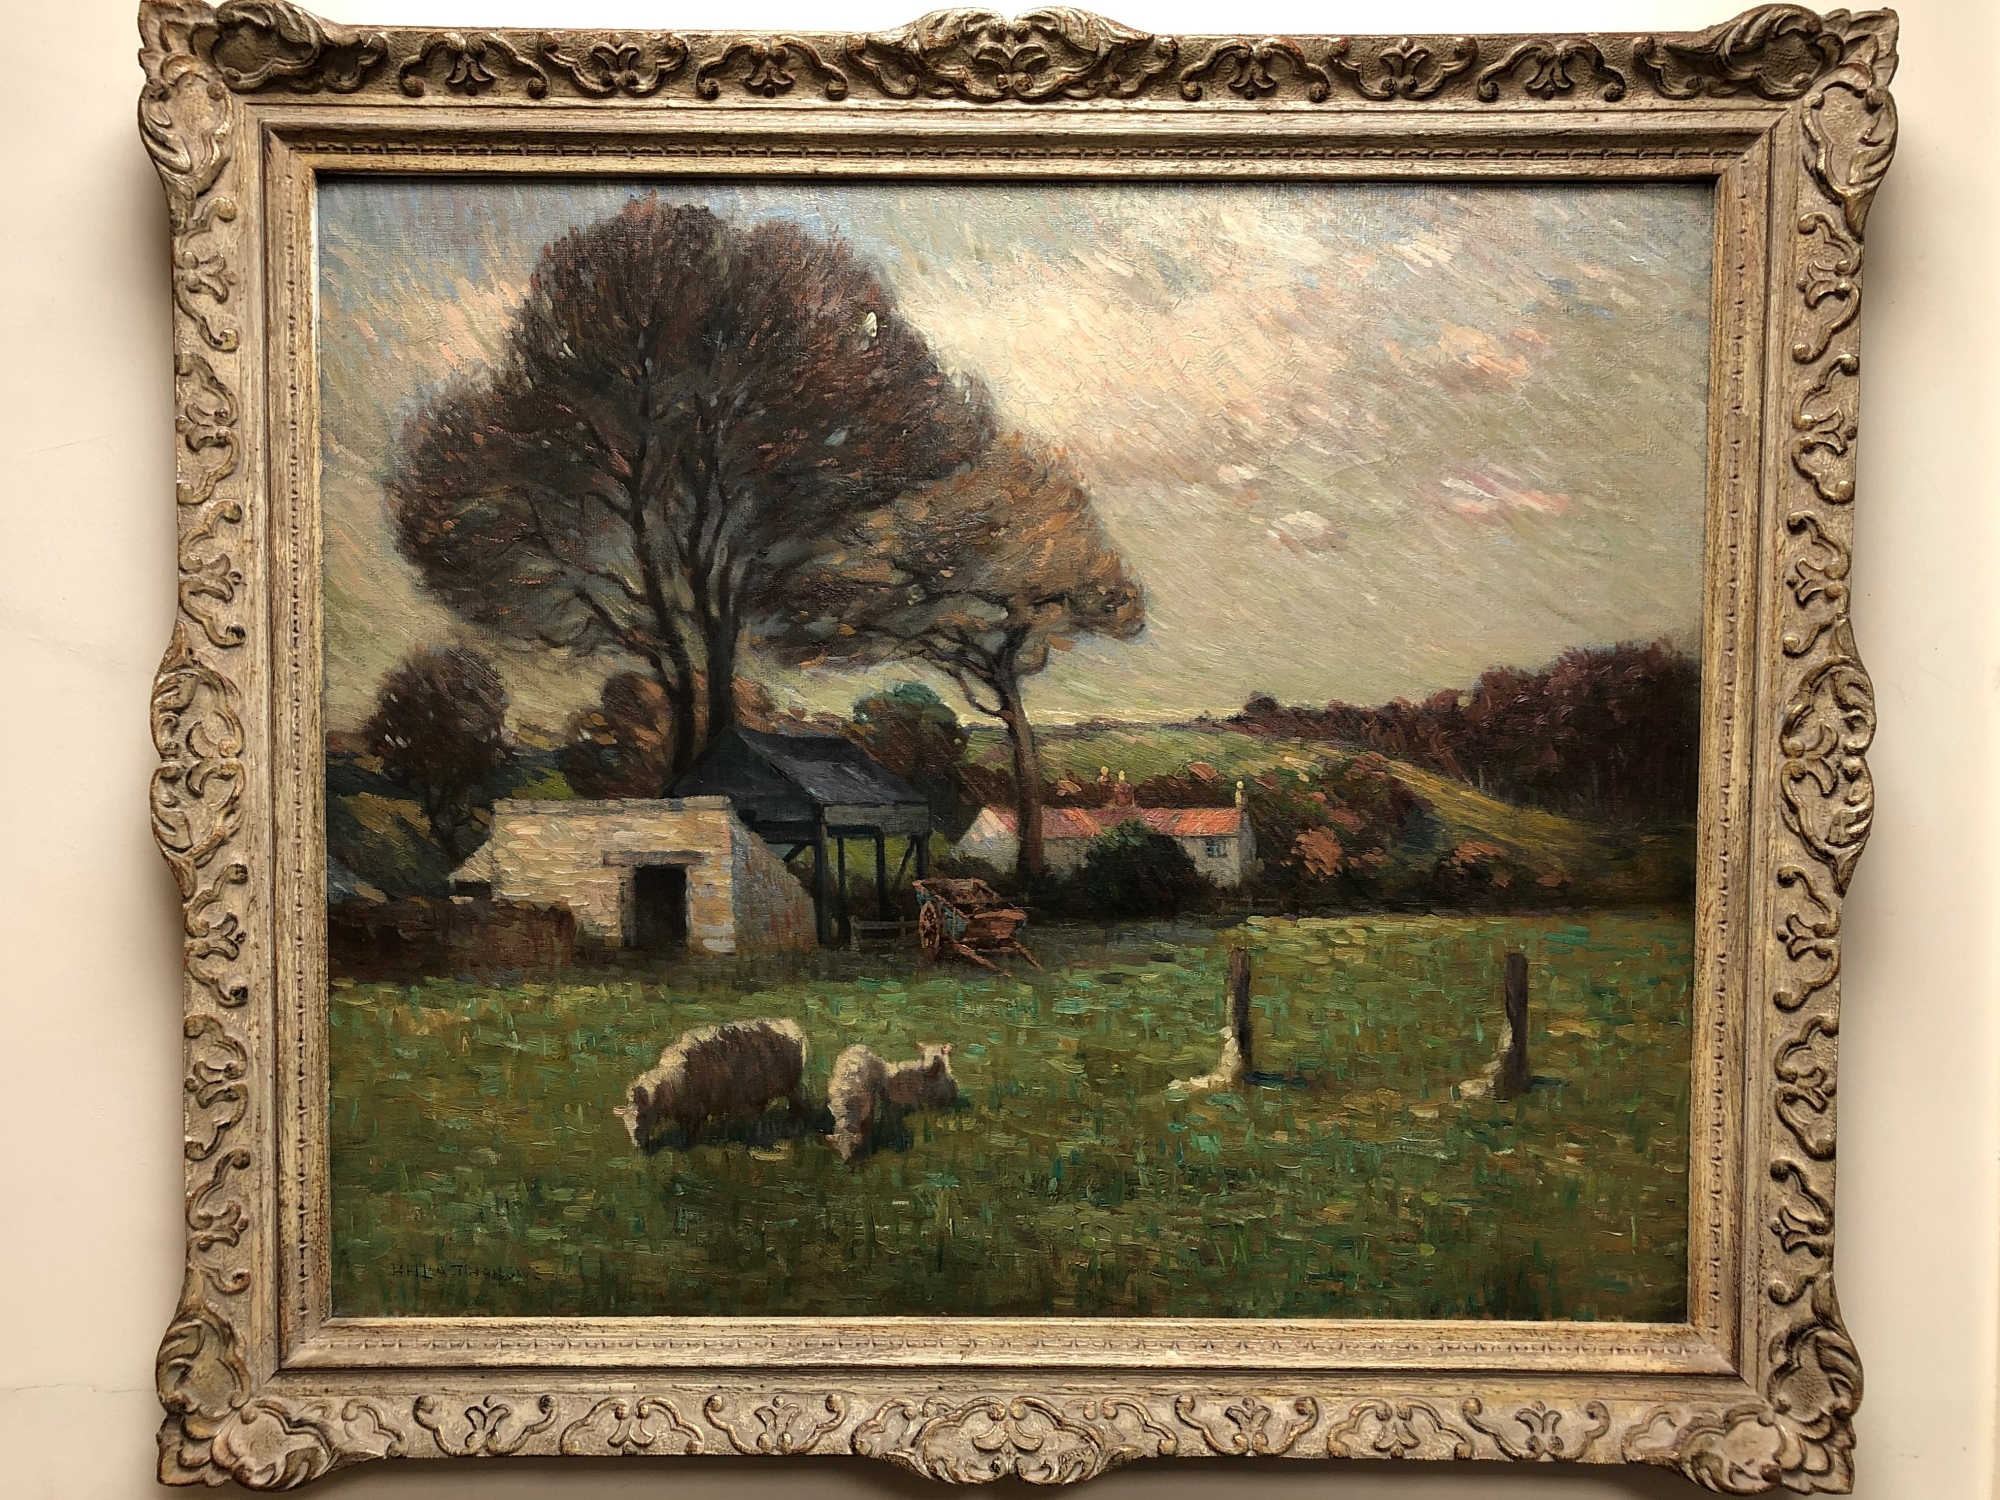 Henry Herbert La Thangue (1859 - 1929) : Sheep Grazing in a Paddock with Hay Cart and Farm